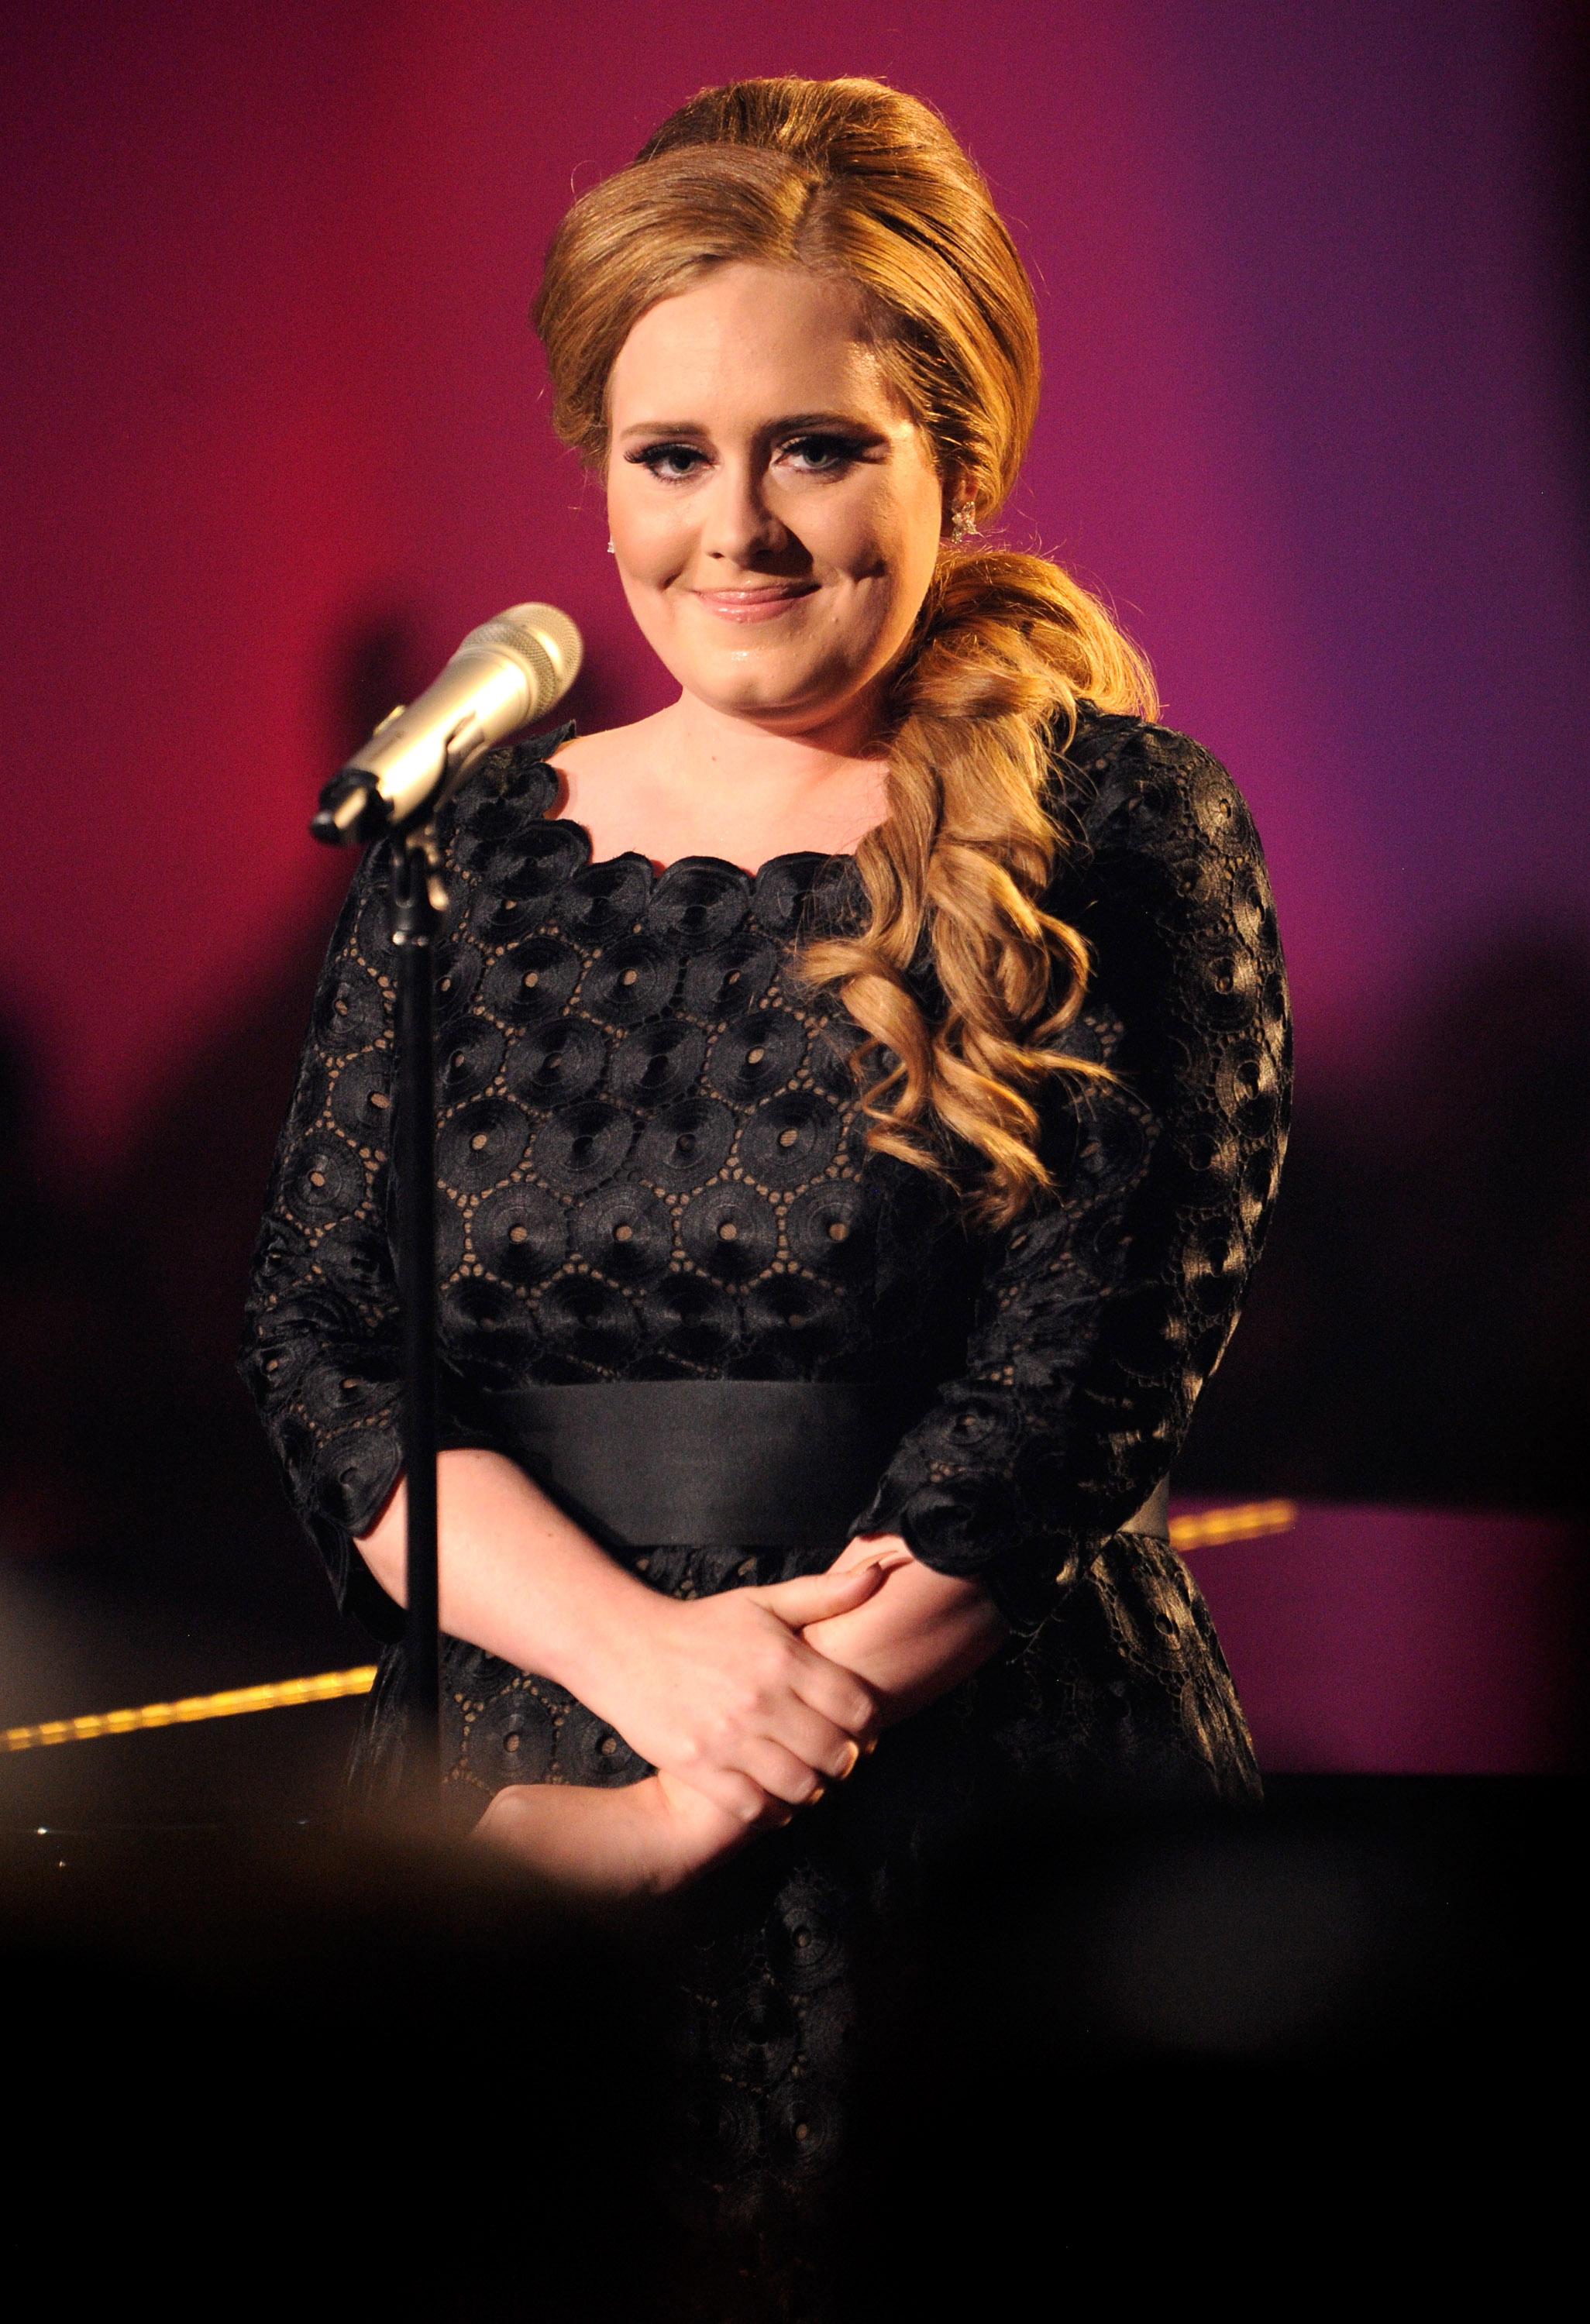 Adele performs on stage at the The 28th Annual MTV Video Music Awards at Nokia Theatre L.A. LIVE on August 28, 2011 in Los Angeles, California.